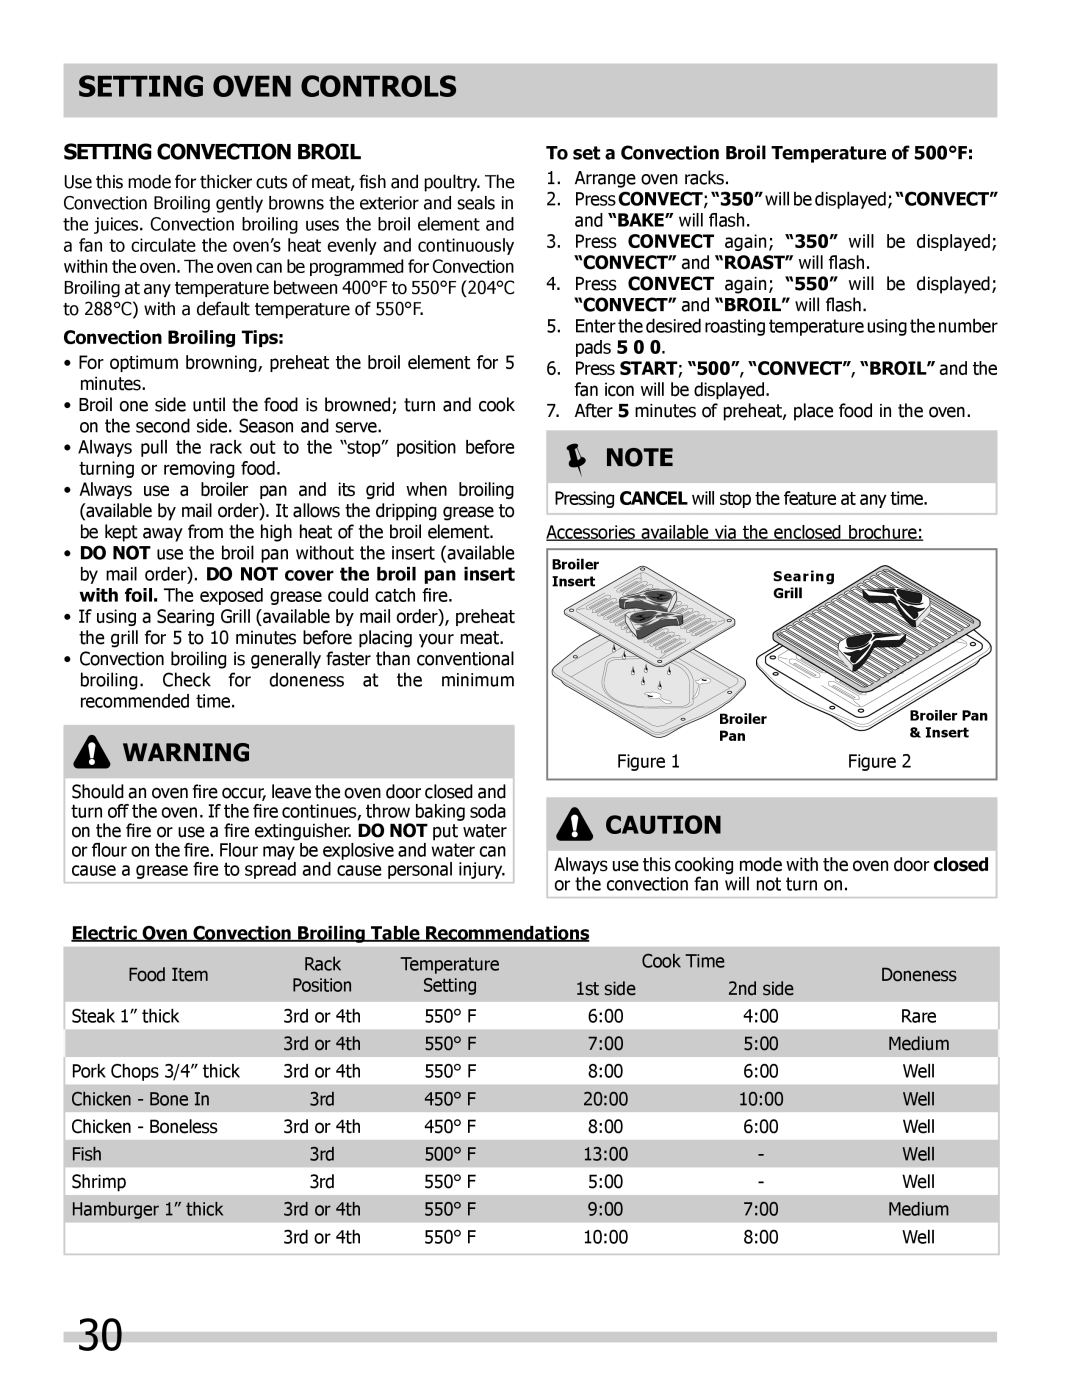 Frigidaire 318205300 Setting Convection BROIL, Setting Oven Controls,  Note, Convection Broiling Tips 